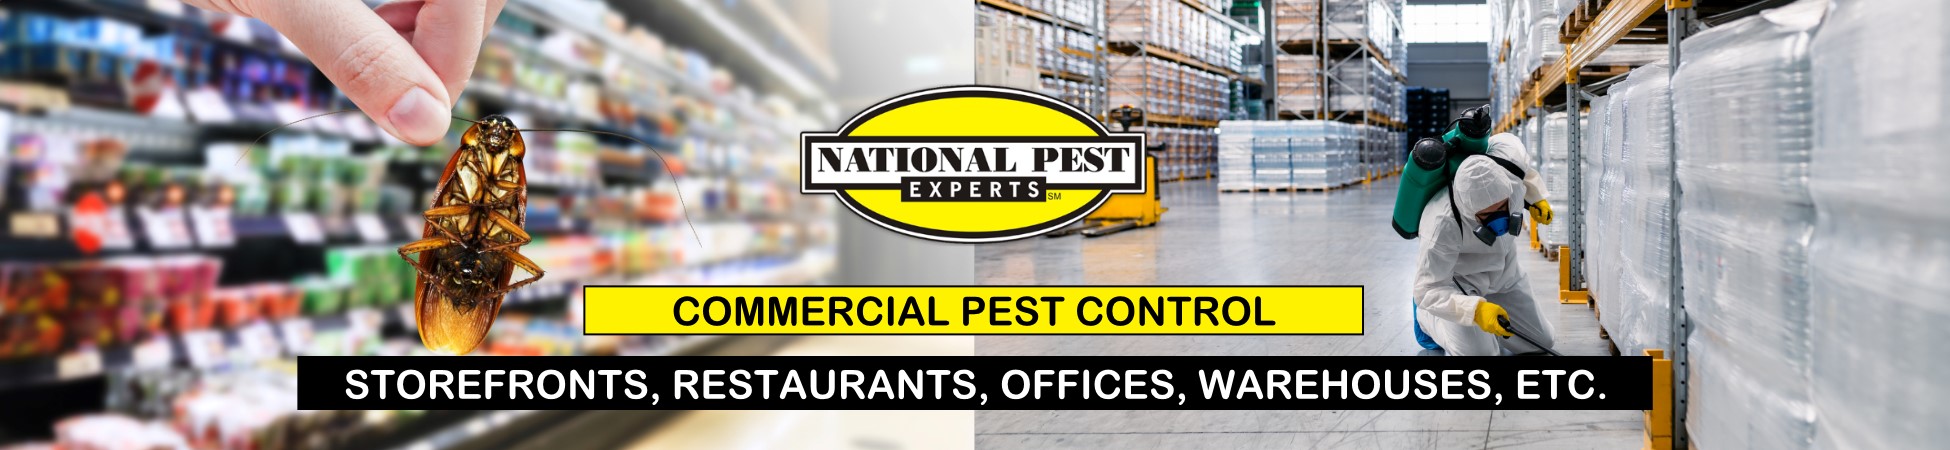 National Pest Experts - Commercial & Industrial exterminating and pest control in Plainedge, NY